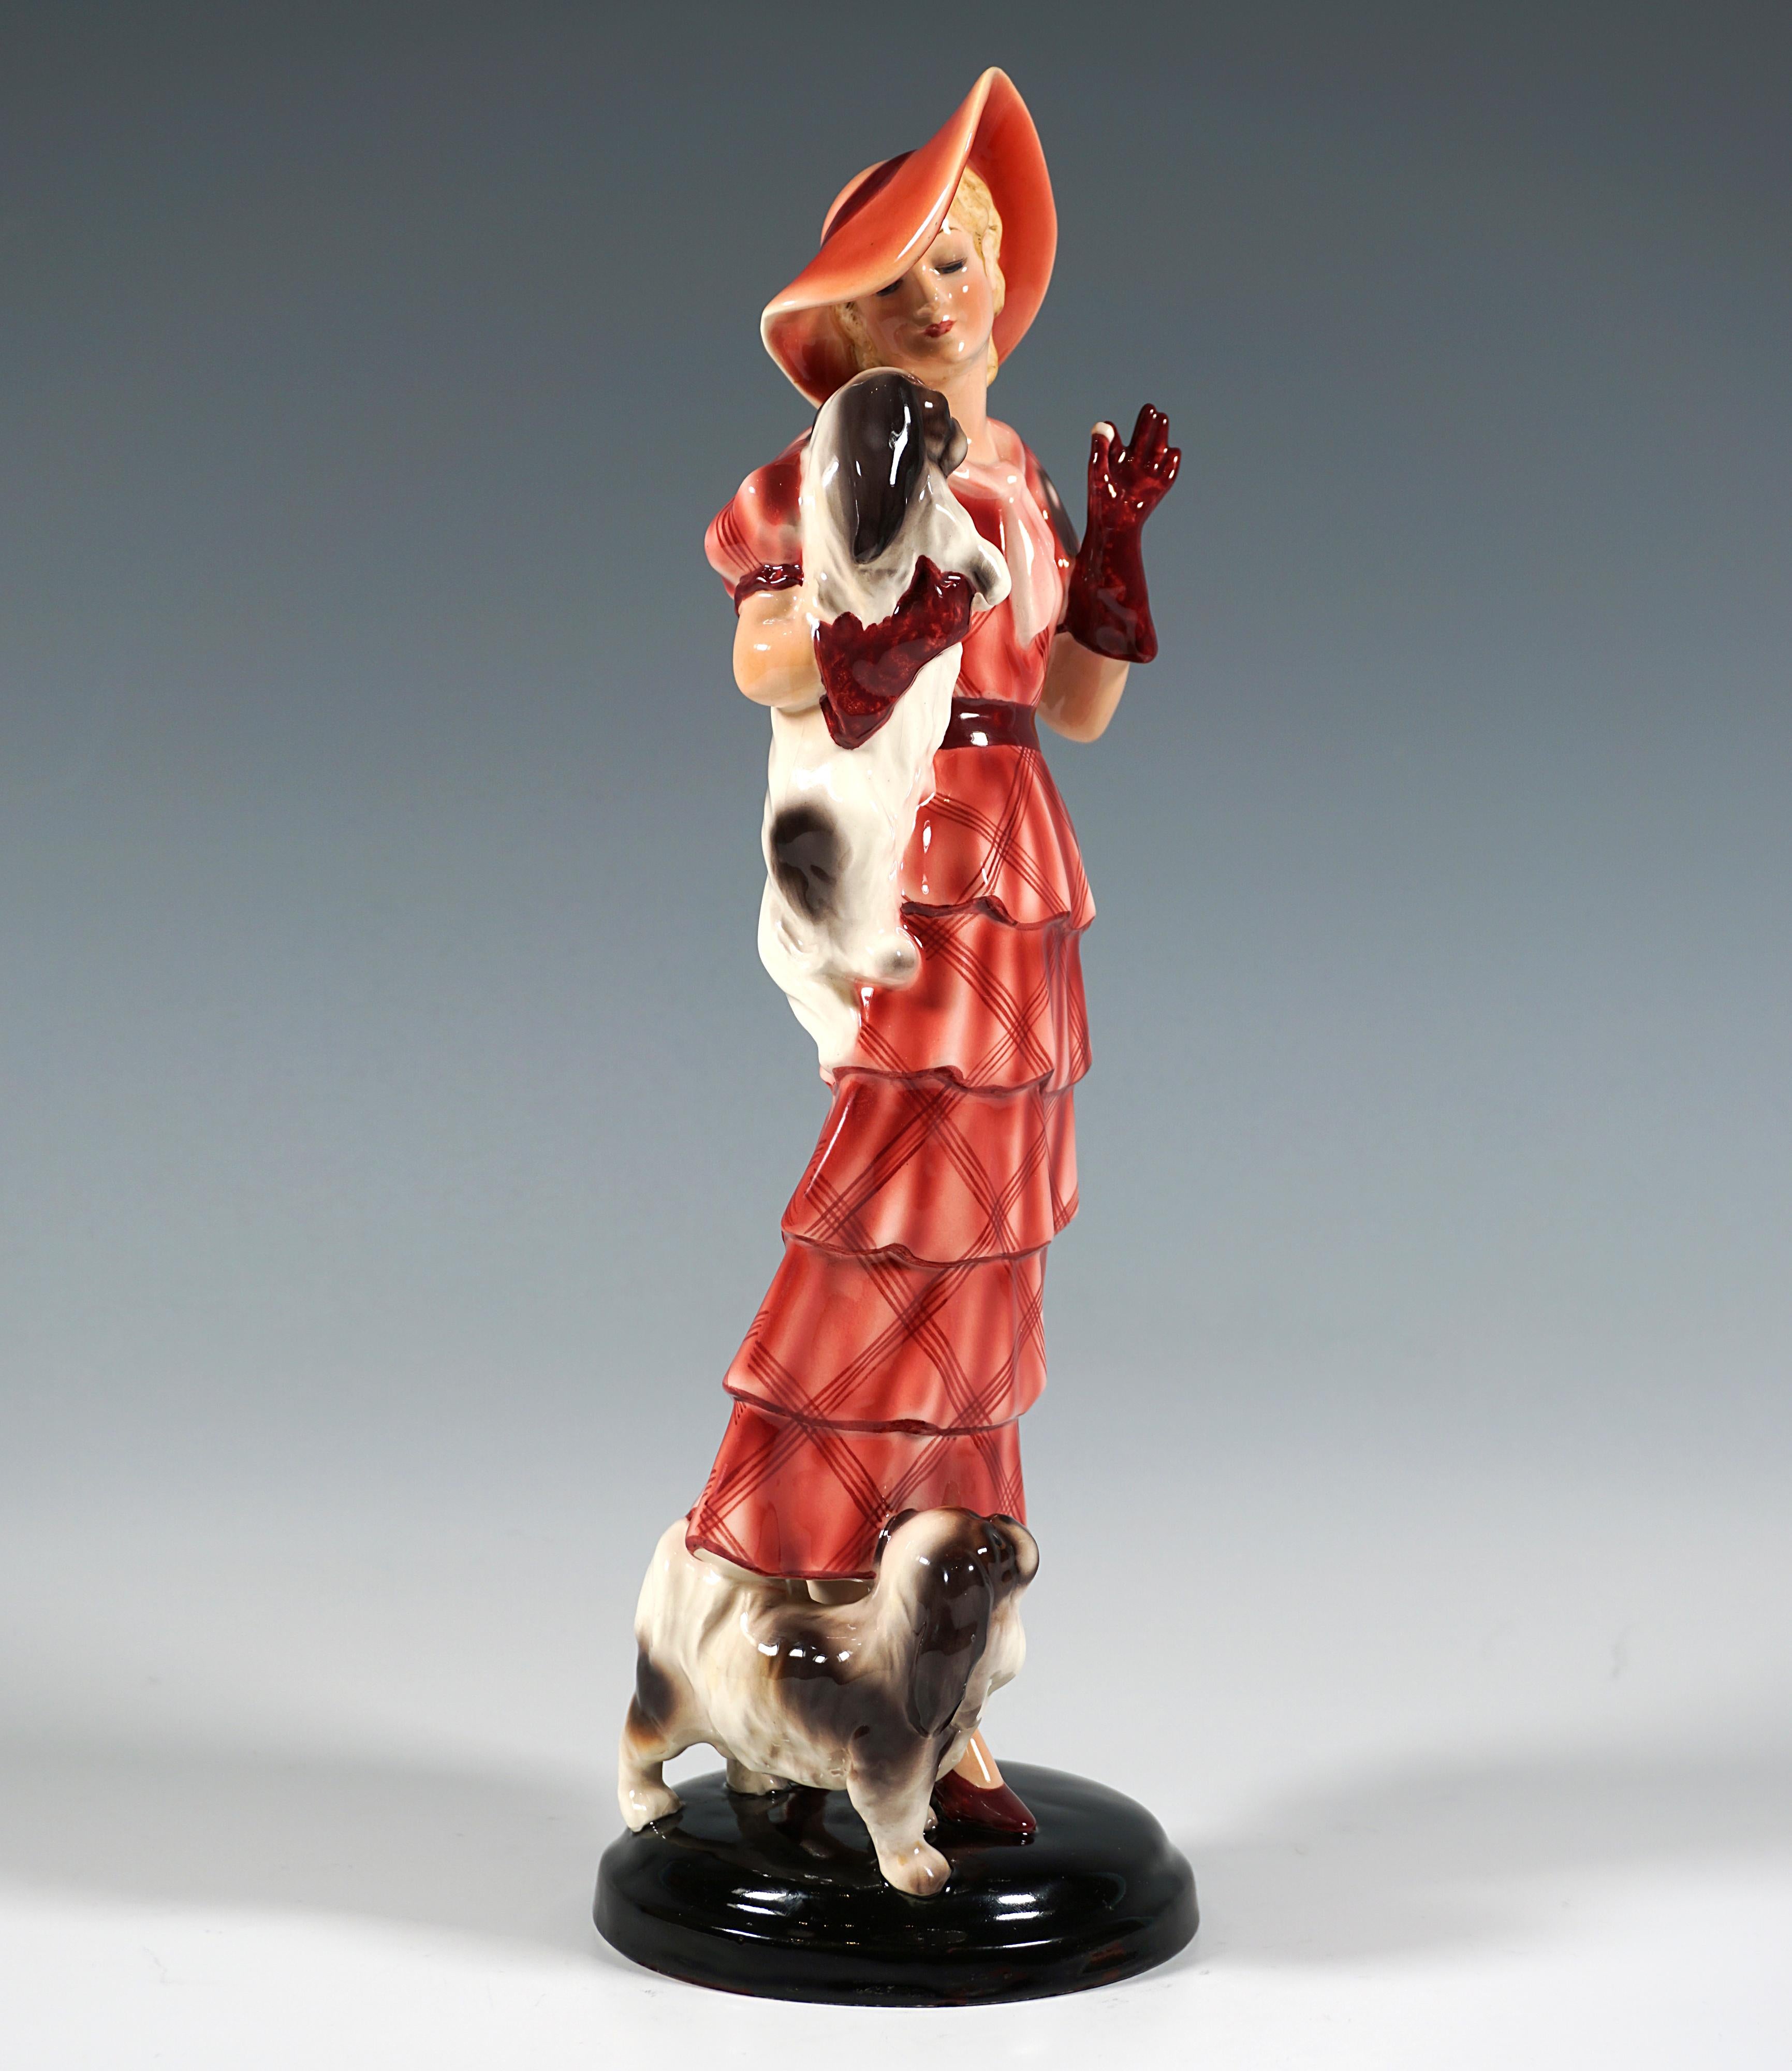 Very Rare Goldscheider Vienna Figurine of the 1930s:
Depiction of a standing, elegant lady in a long, red, checkered dress with tiered flounces, matching hat and red gloves, holding a Pekingese in her right arm and offering it a treat with her left